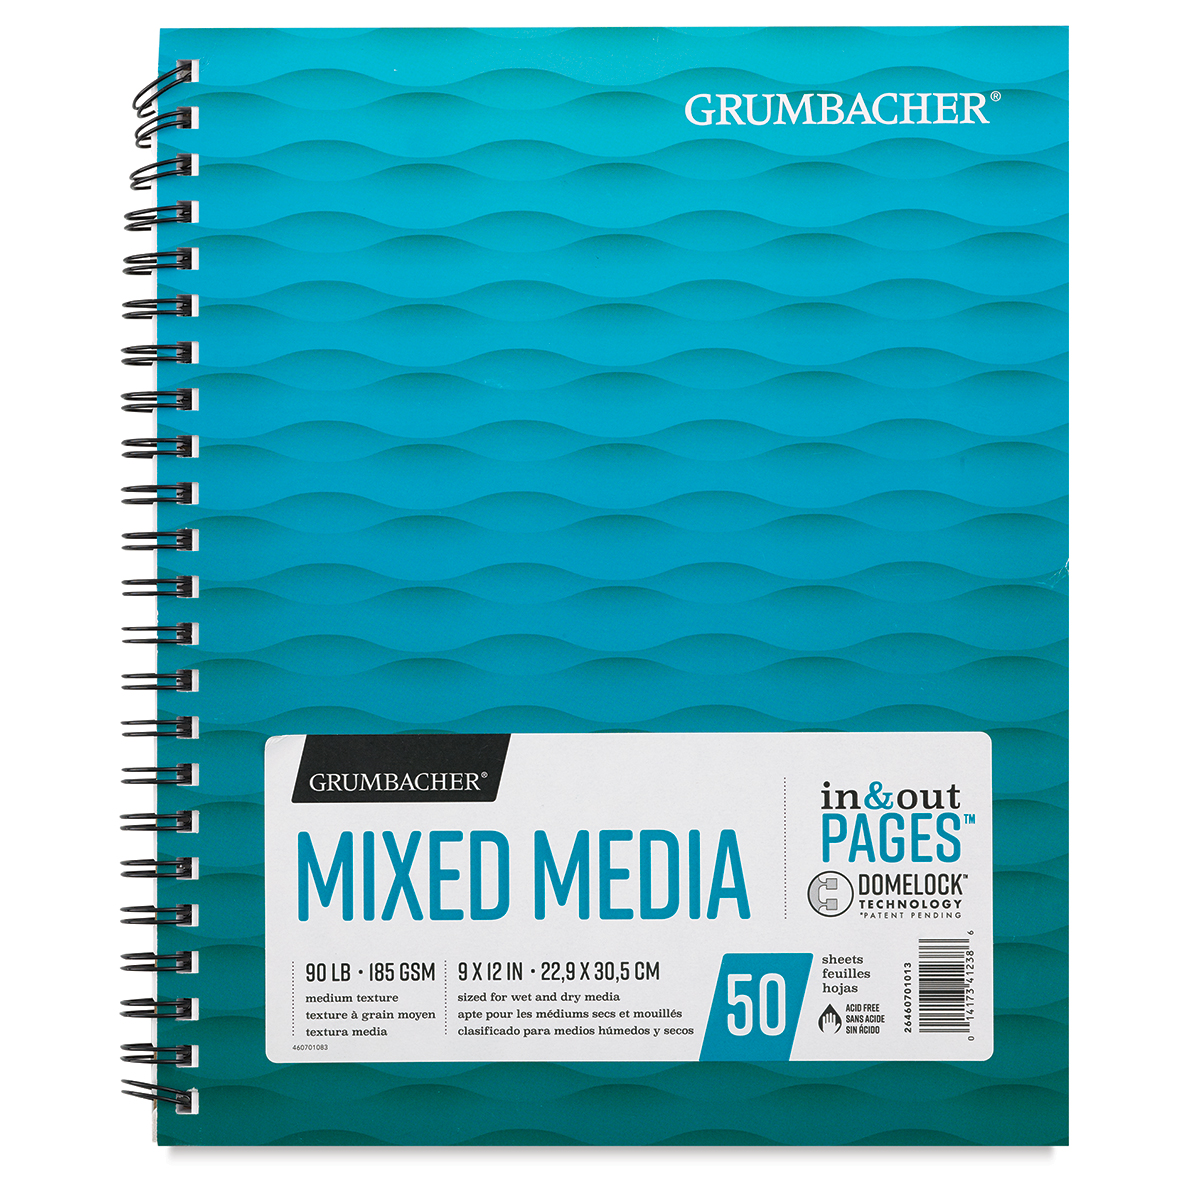 Grumbacher 98lb./160GSM Tape Bound Mixed Media Pad - 8 x 8 in